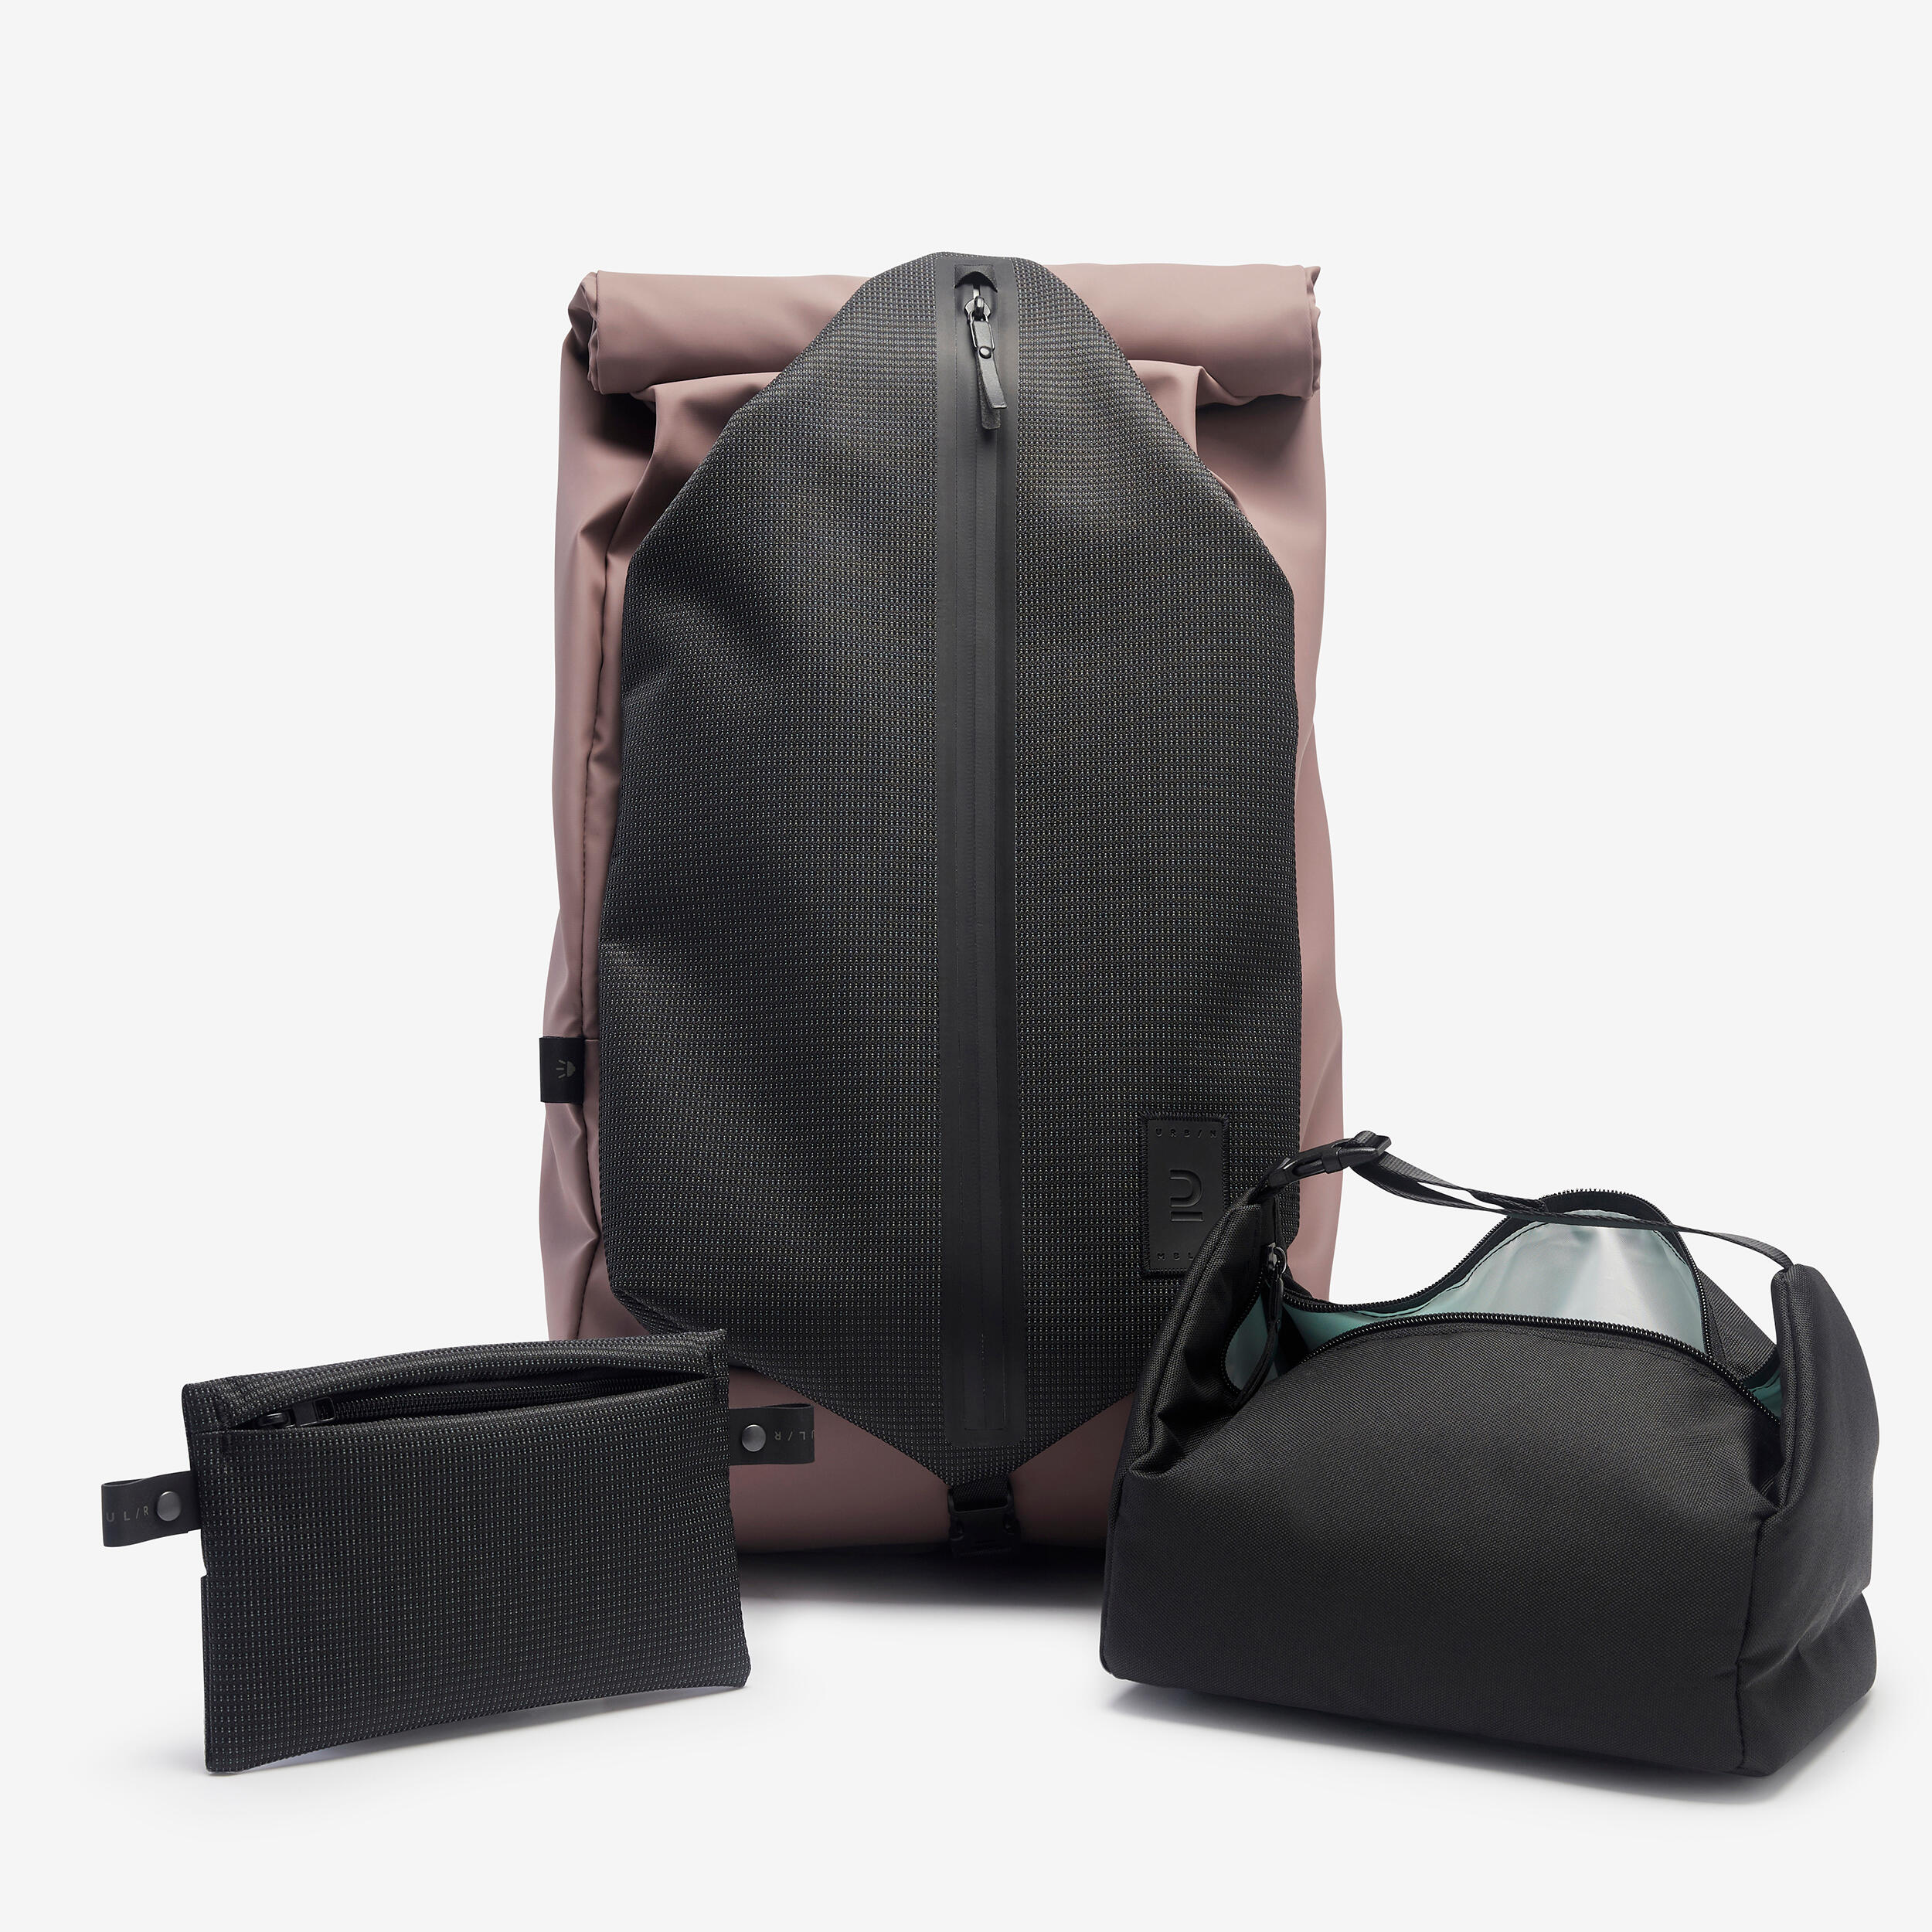 sac a dos - marche urbaine - activ mblty brooklyn 27l + lunch box - rose - newfeel